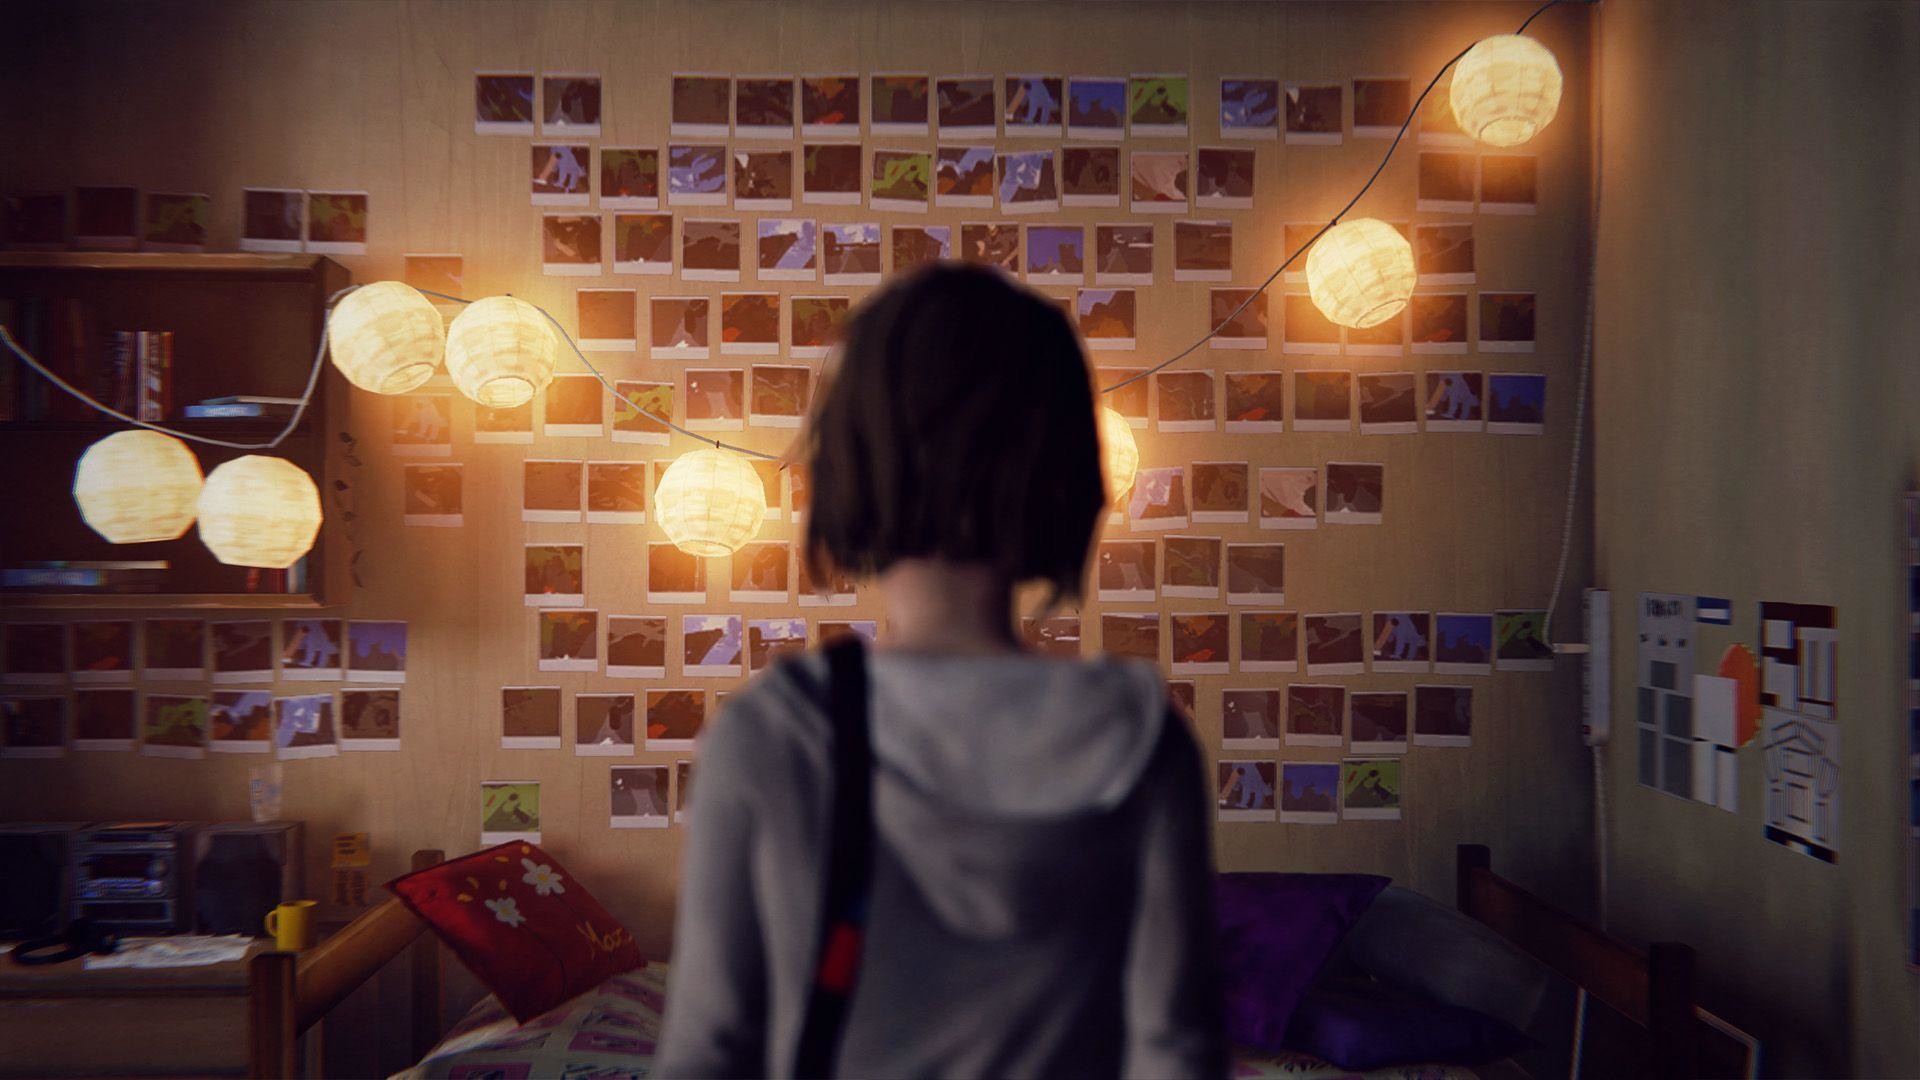 1920x1080 78 Life Is Strange HD Wallpapers | Backgrounds - Wallpaper Abyss